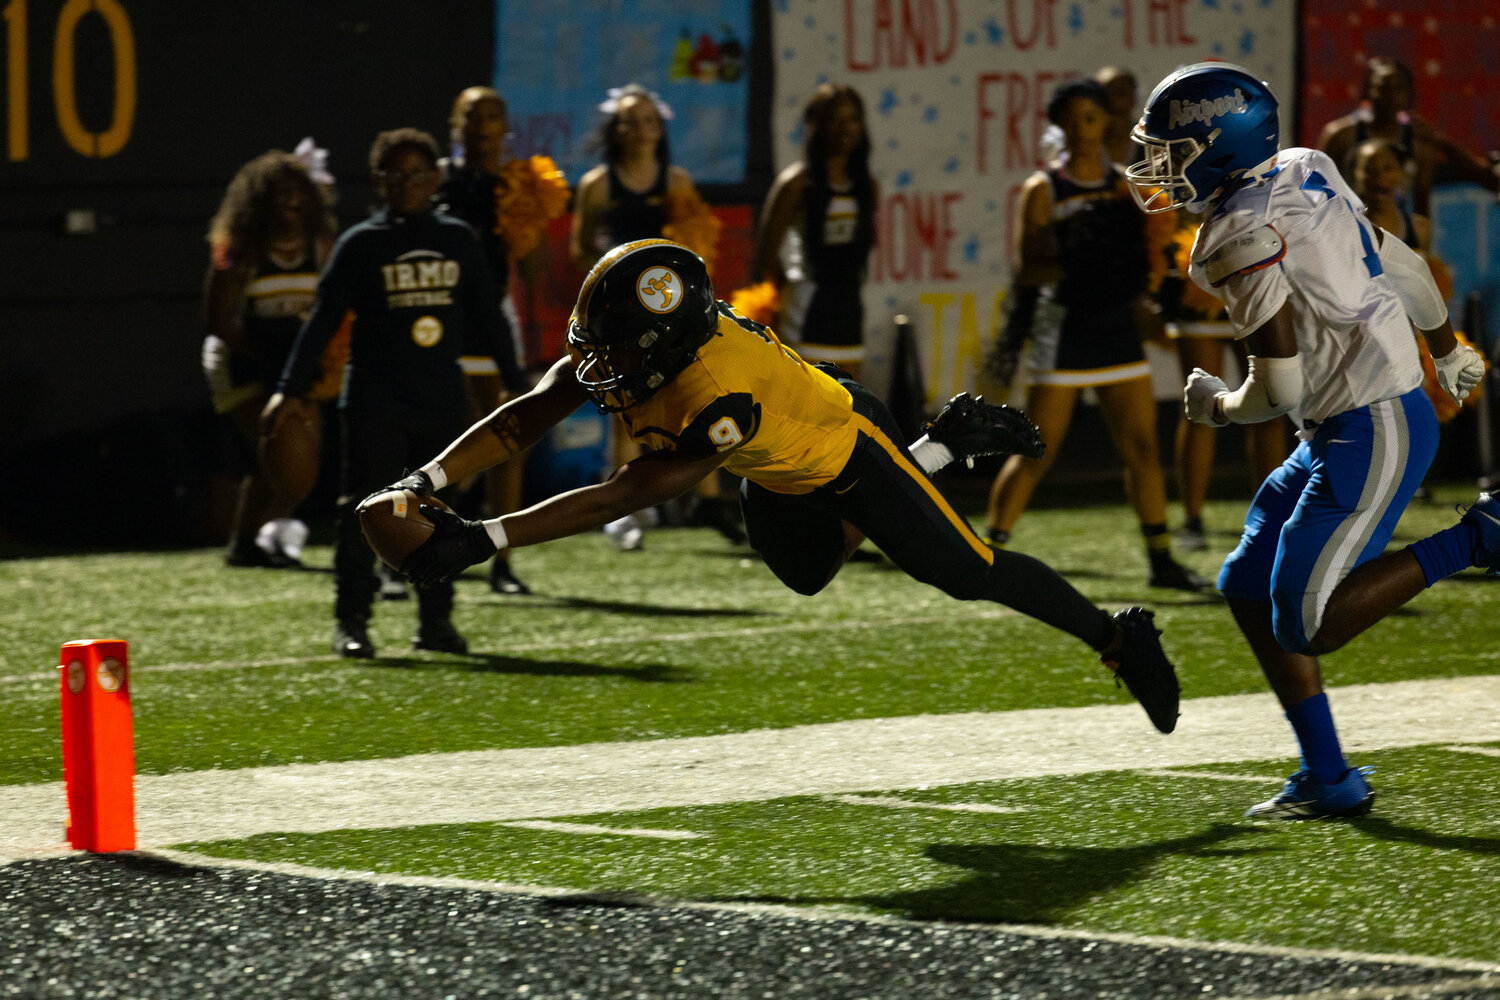 Irmo wide receiver Telvin Smith scores a touchdown in the Yellow Jackets' 54-0 win over Airport. Irmo comes into this week ranked third in the state in the 4A classification.